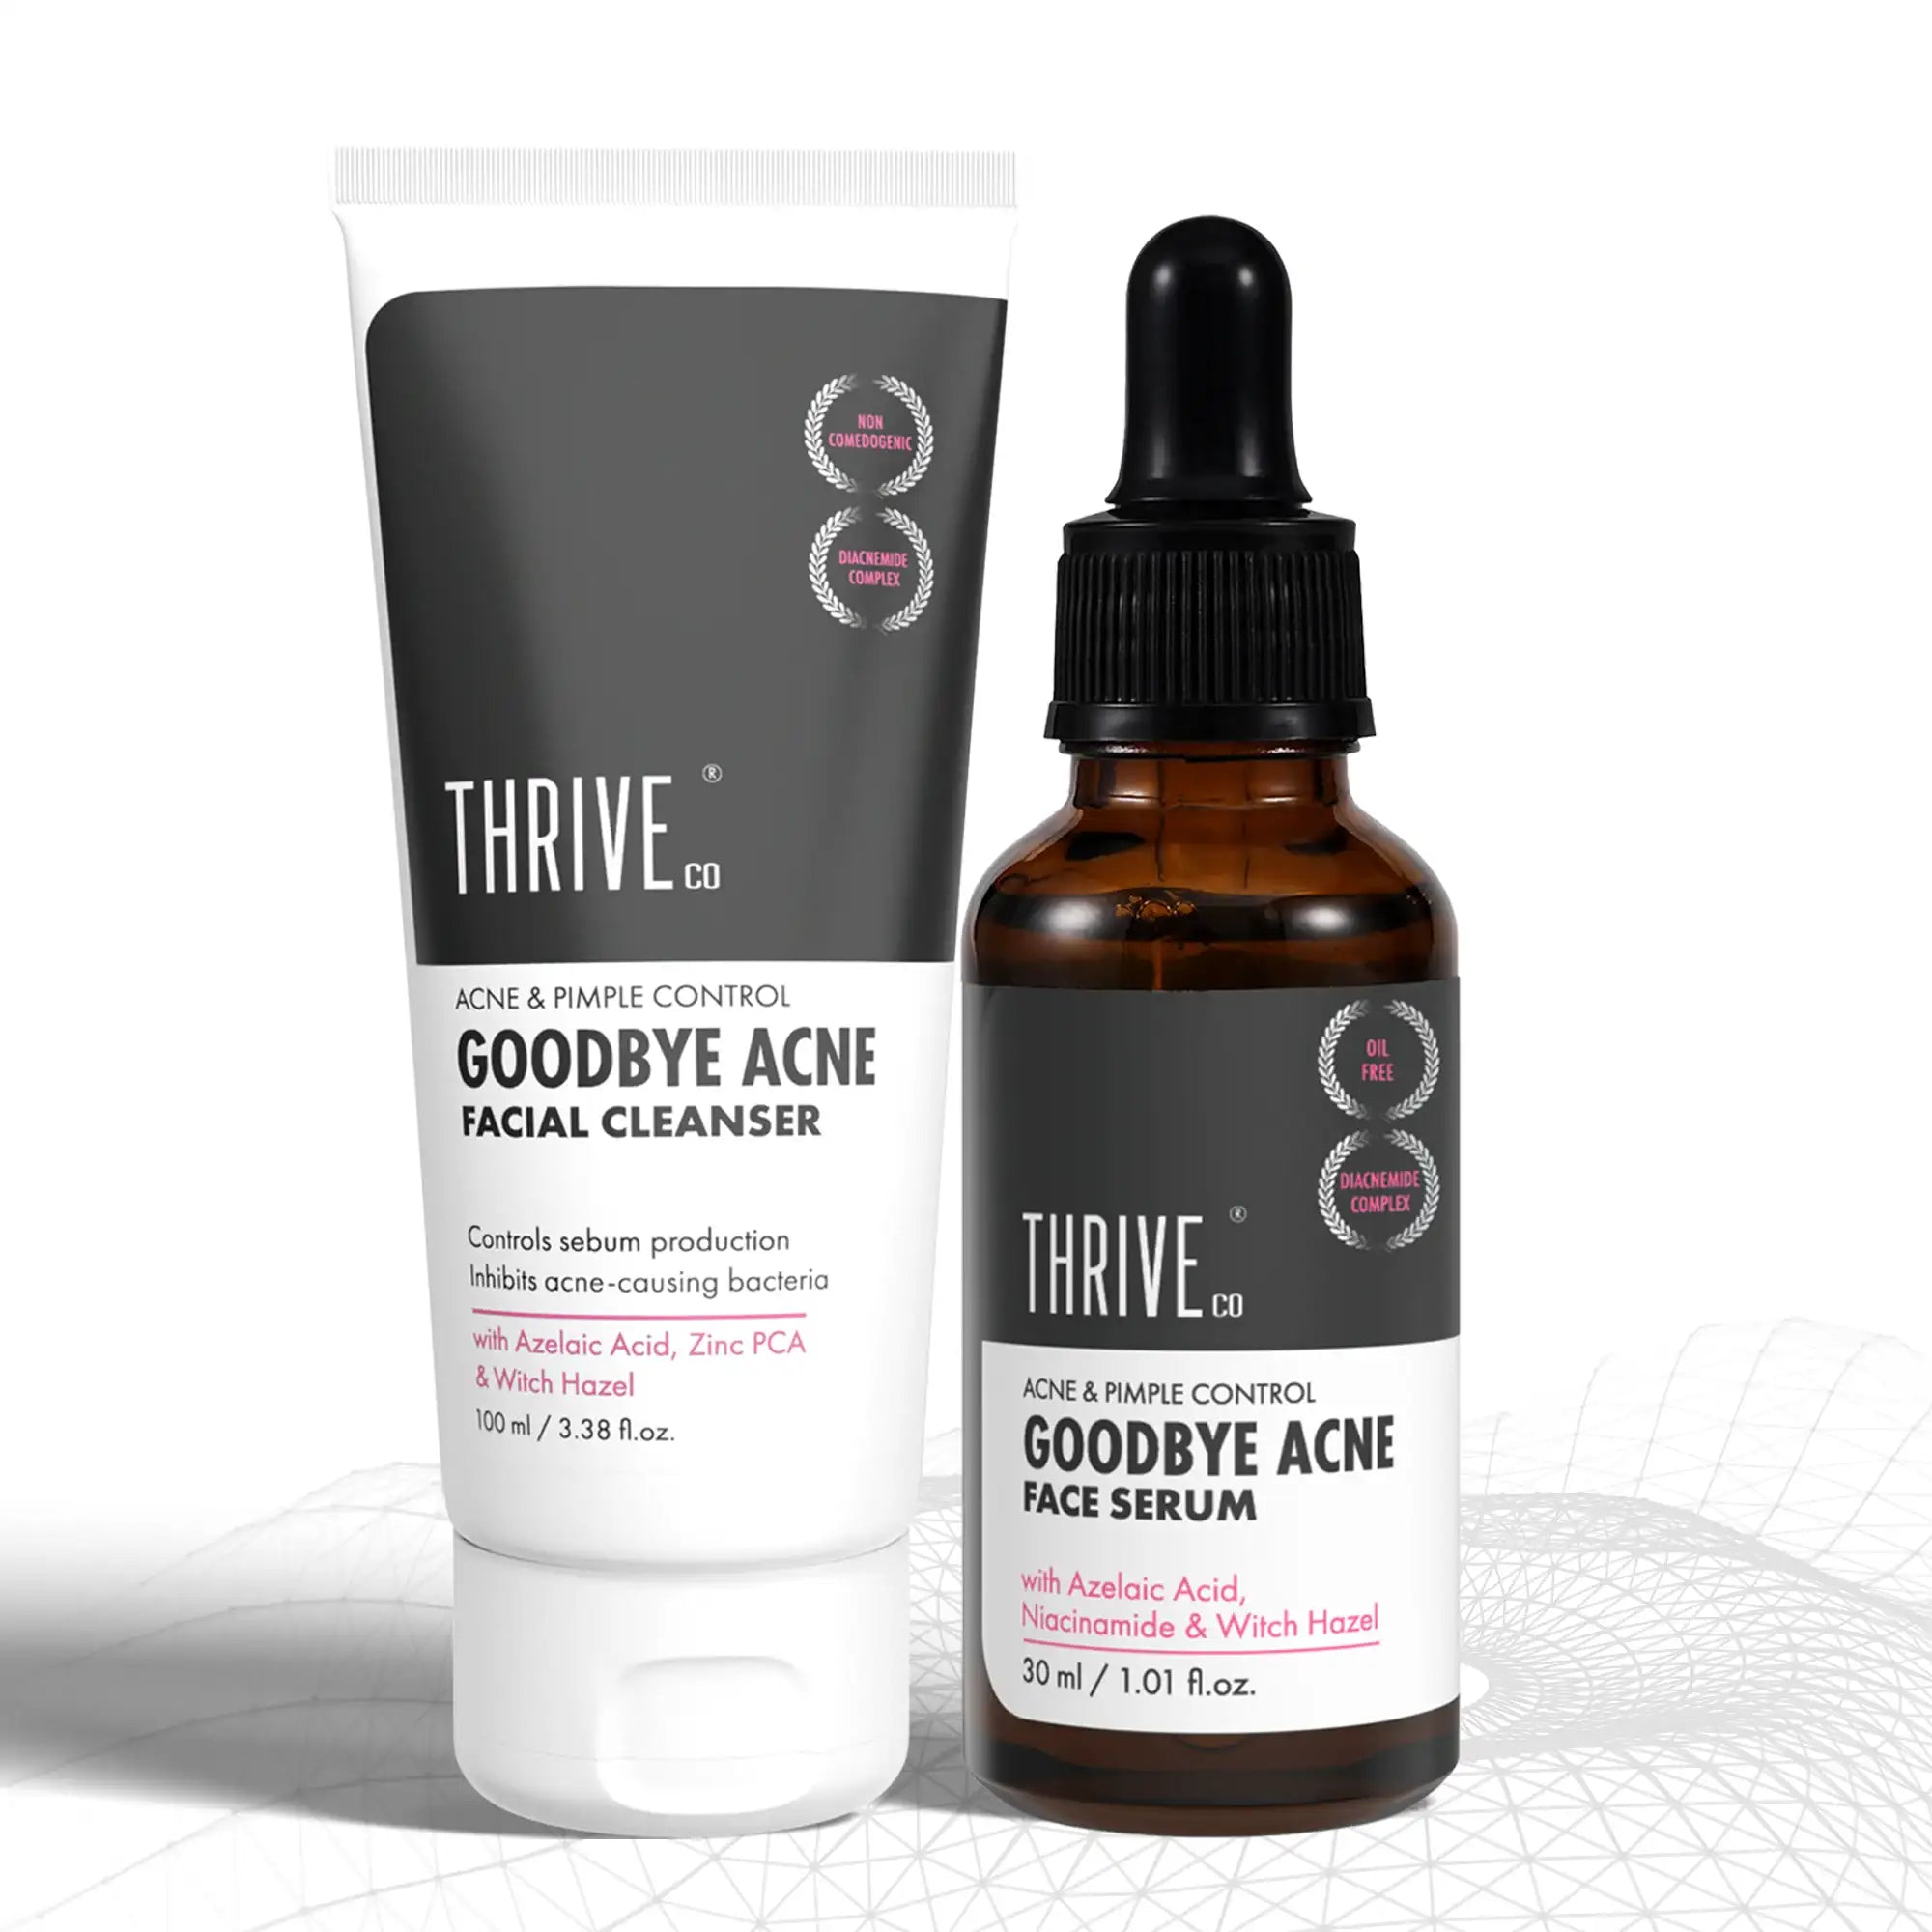 ThriveCo womens Acne Kit for acne and pimple control